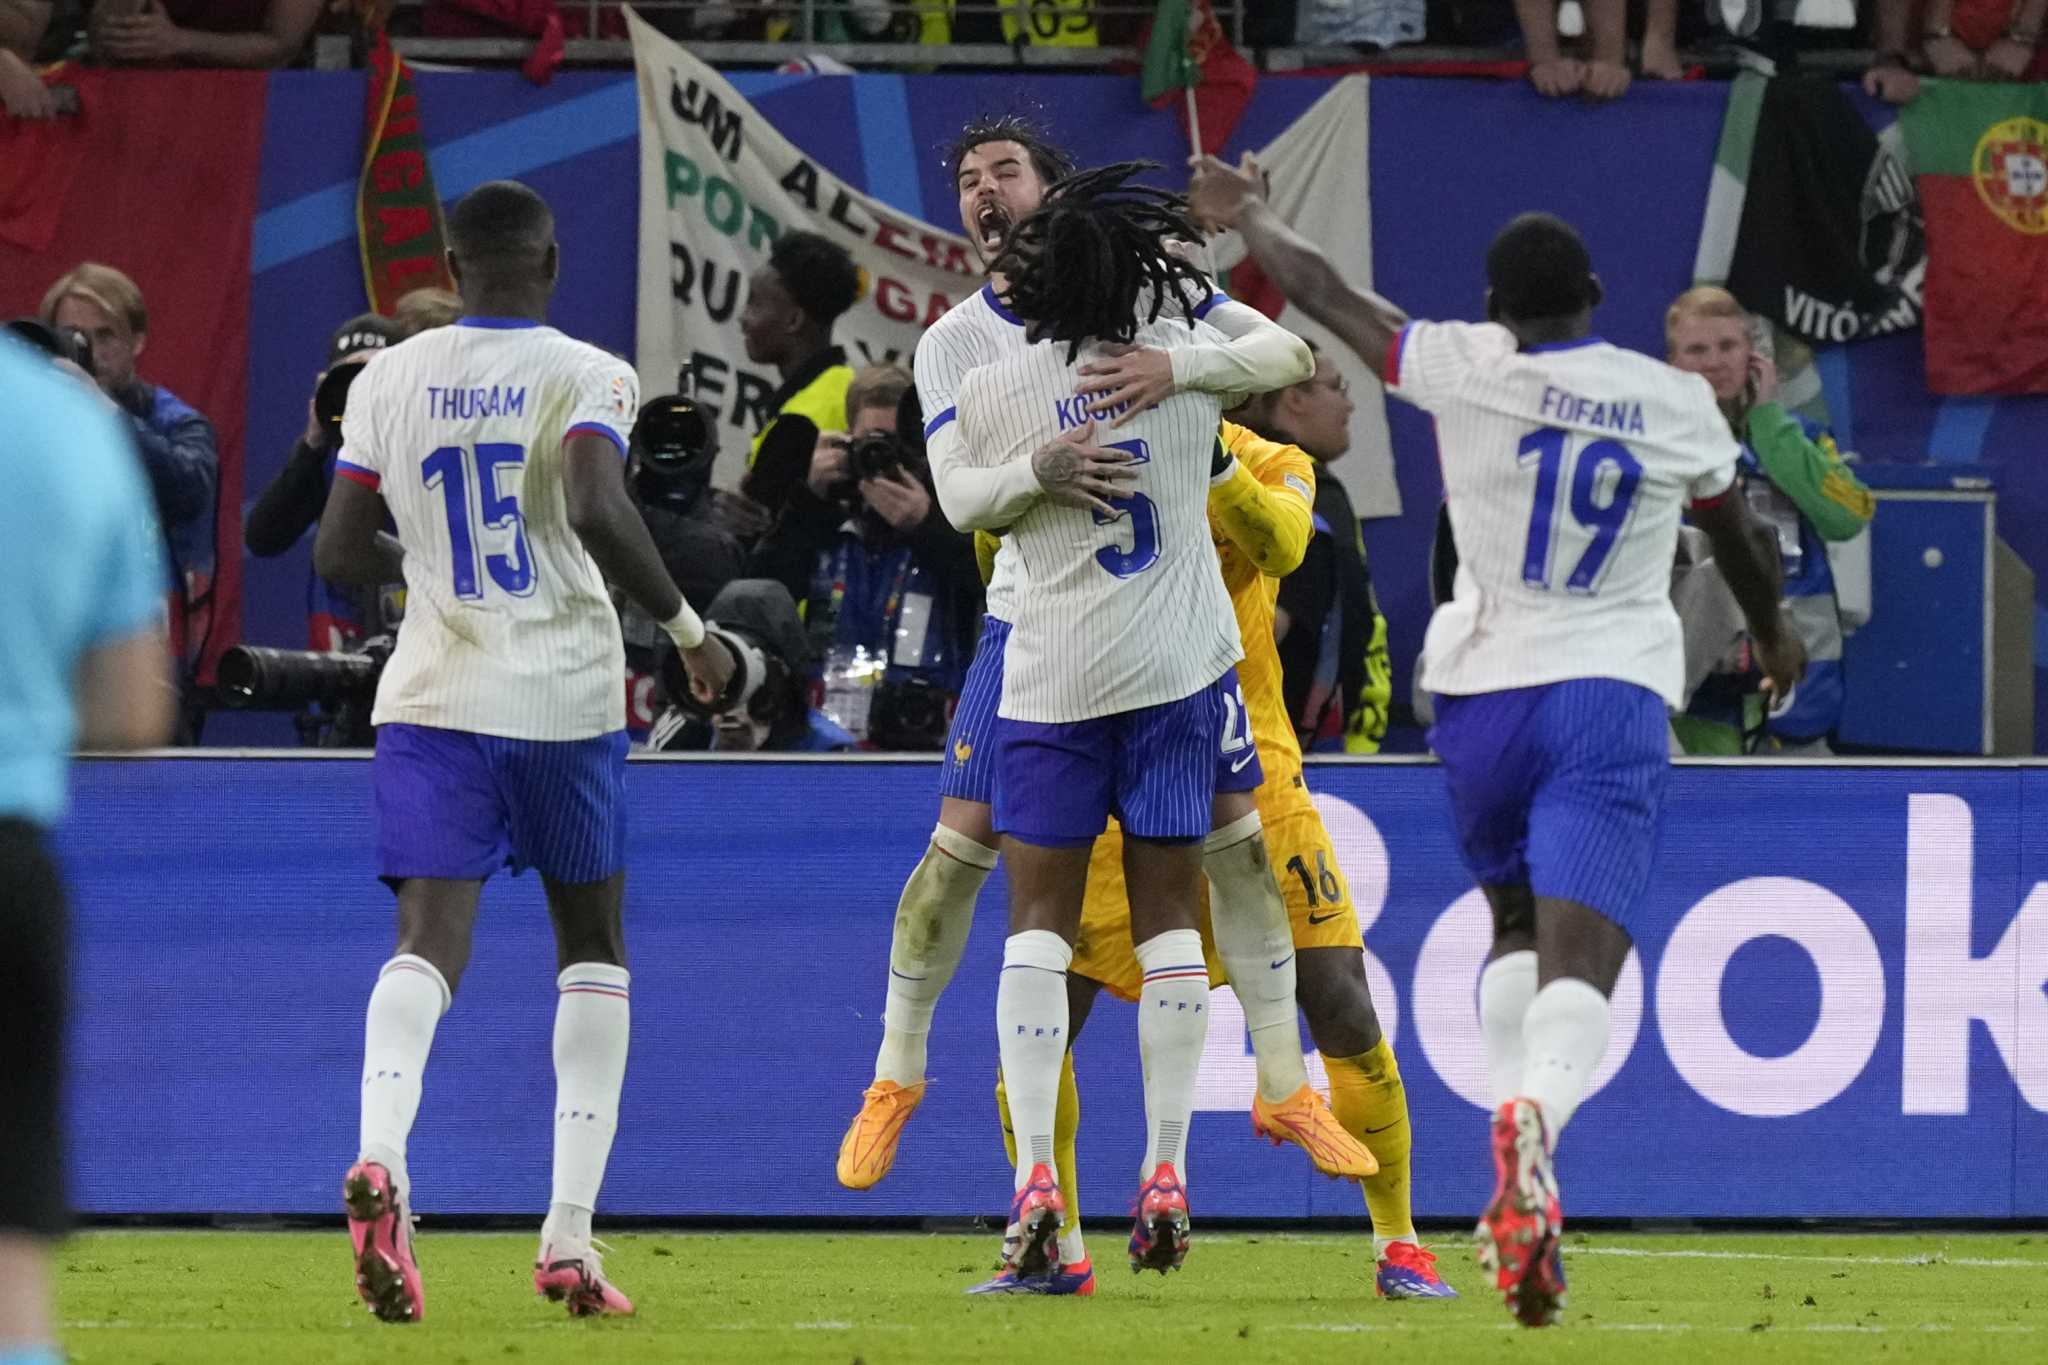 France players celebrating election results back home ahead of Euro 2024 semifinal